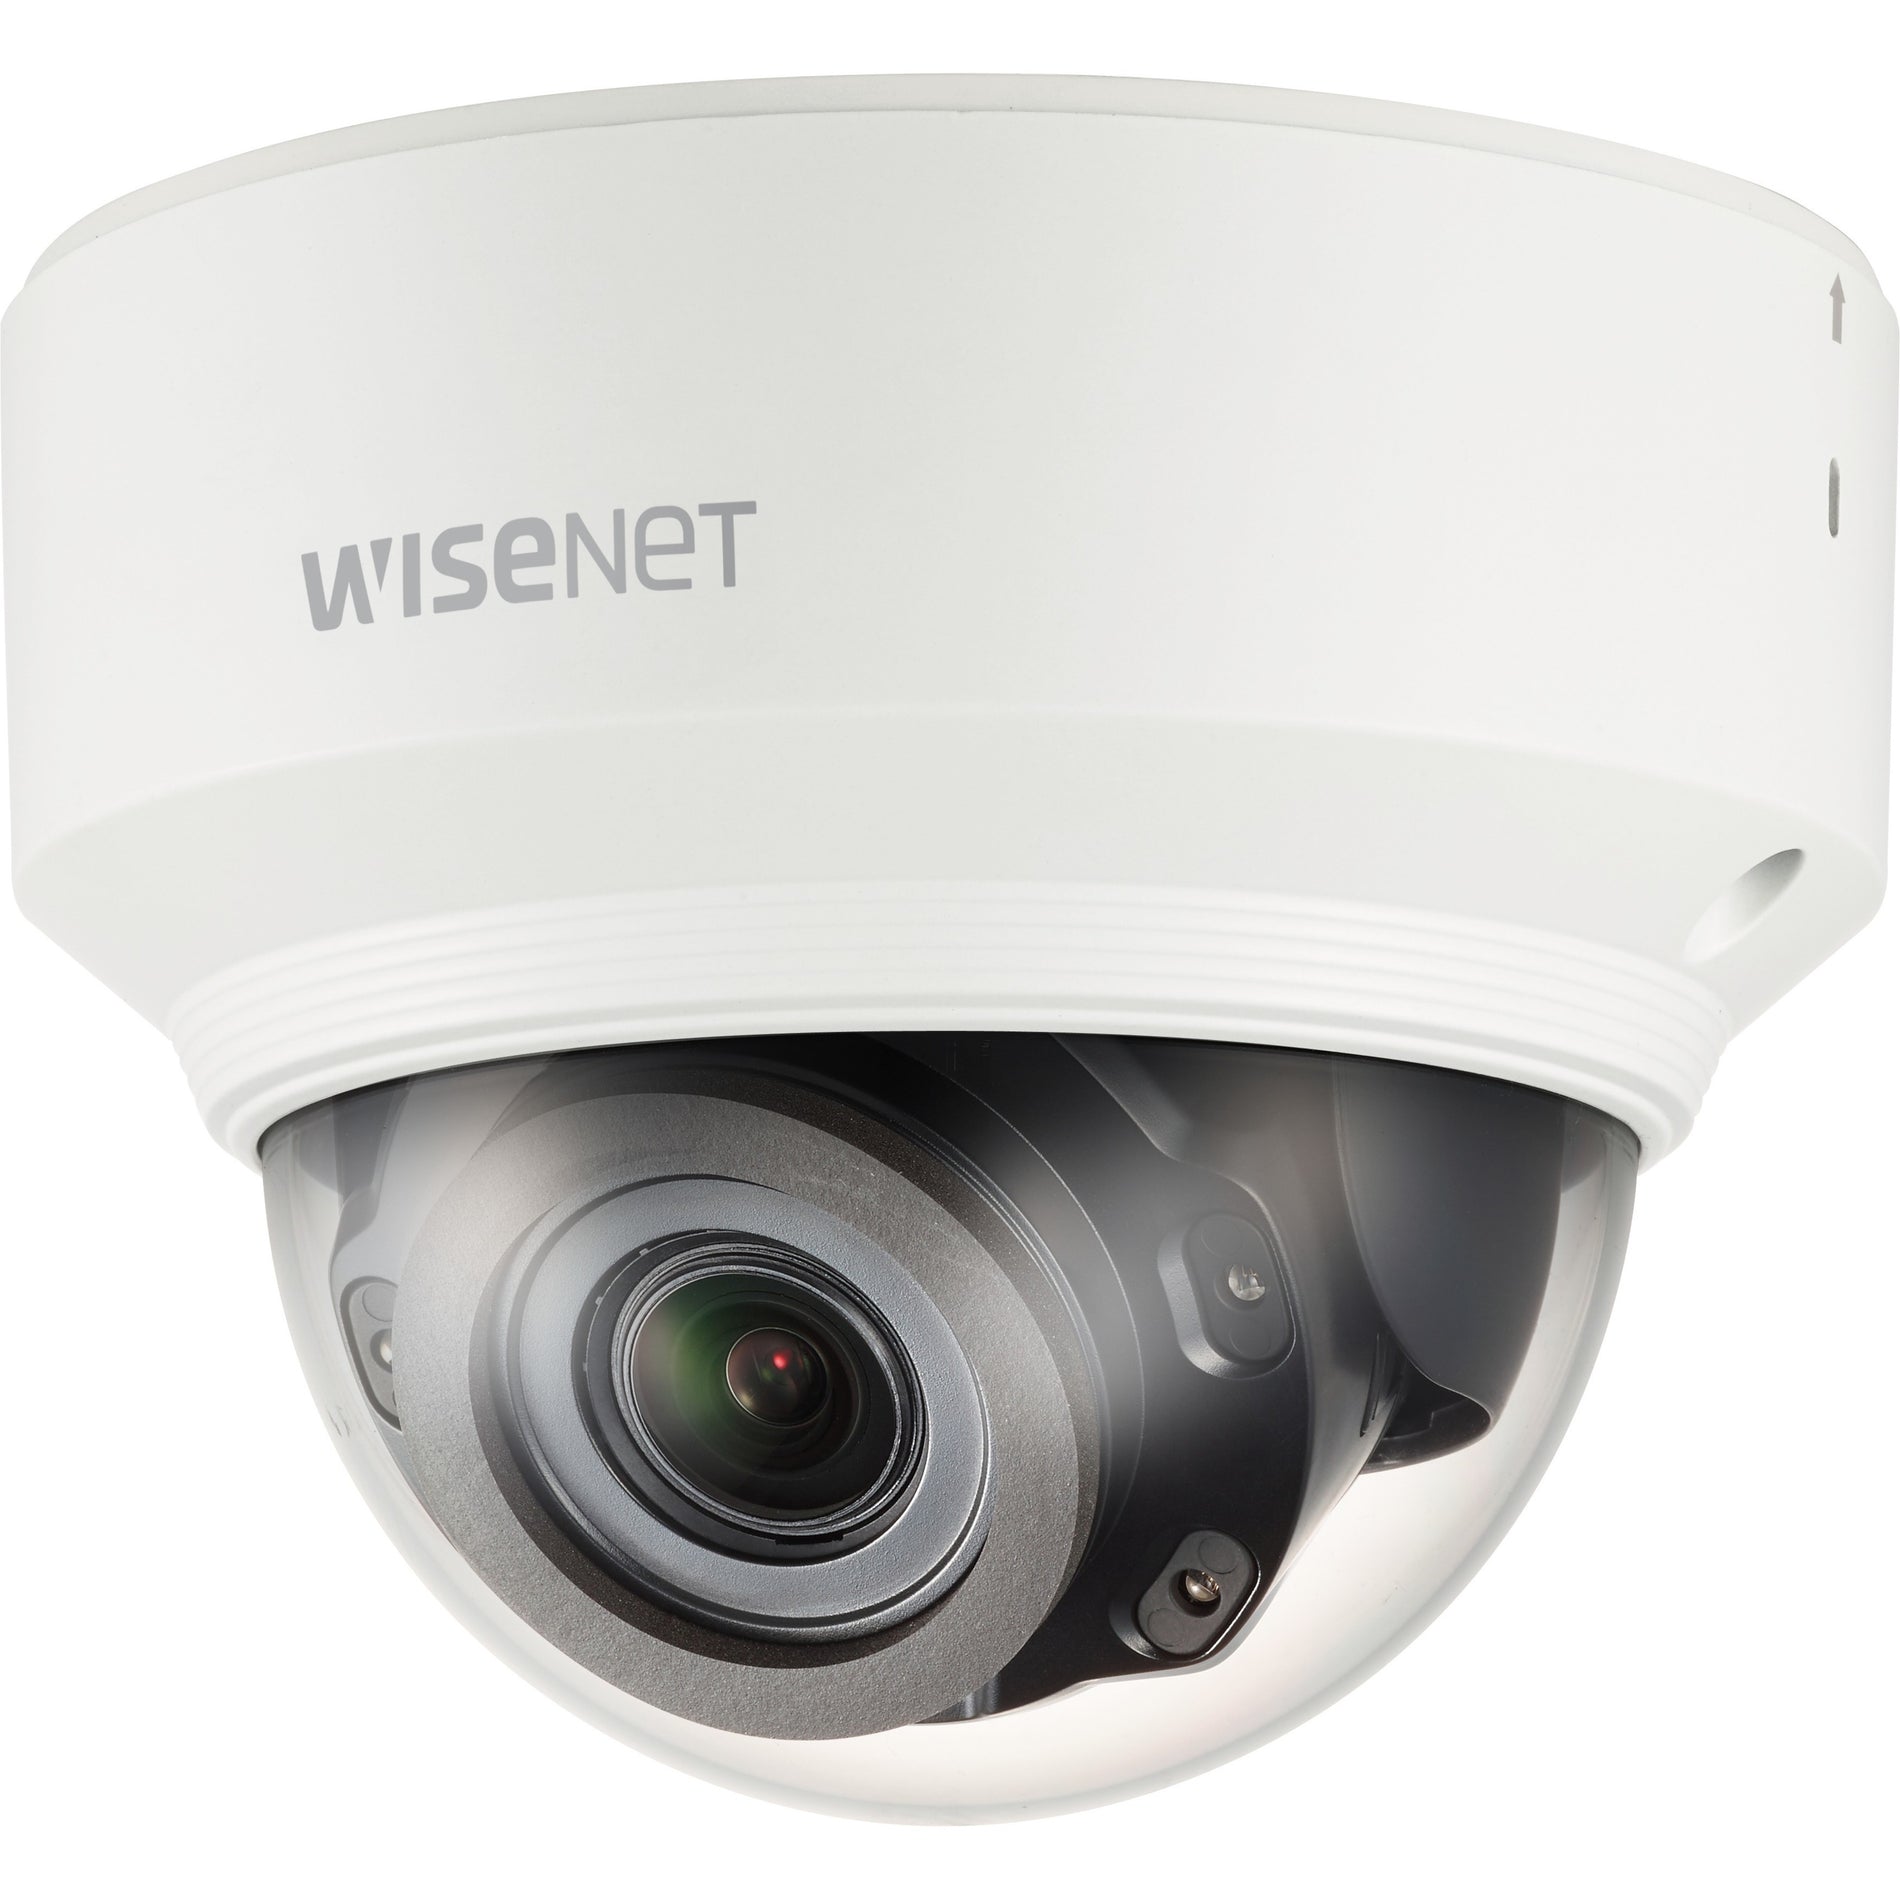 Wisenet XND-8080RV 4 Megapixel Full HD Network Camera, Color Dome, Varifocal Lens, 2.4x Optical Zoom, Memory Card Storage, 30 fps, 2560 x 1920 Video Resolution